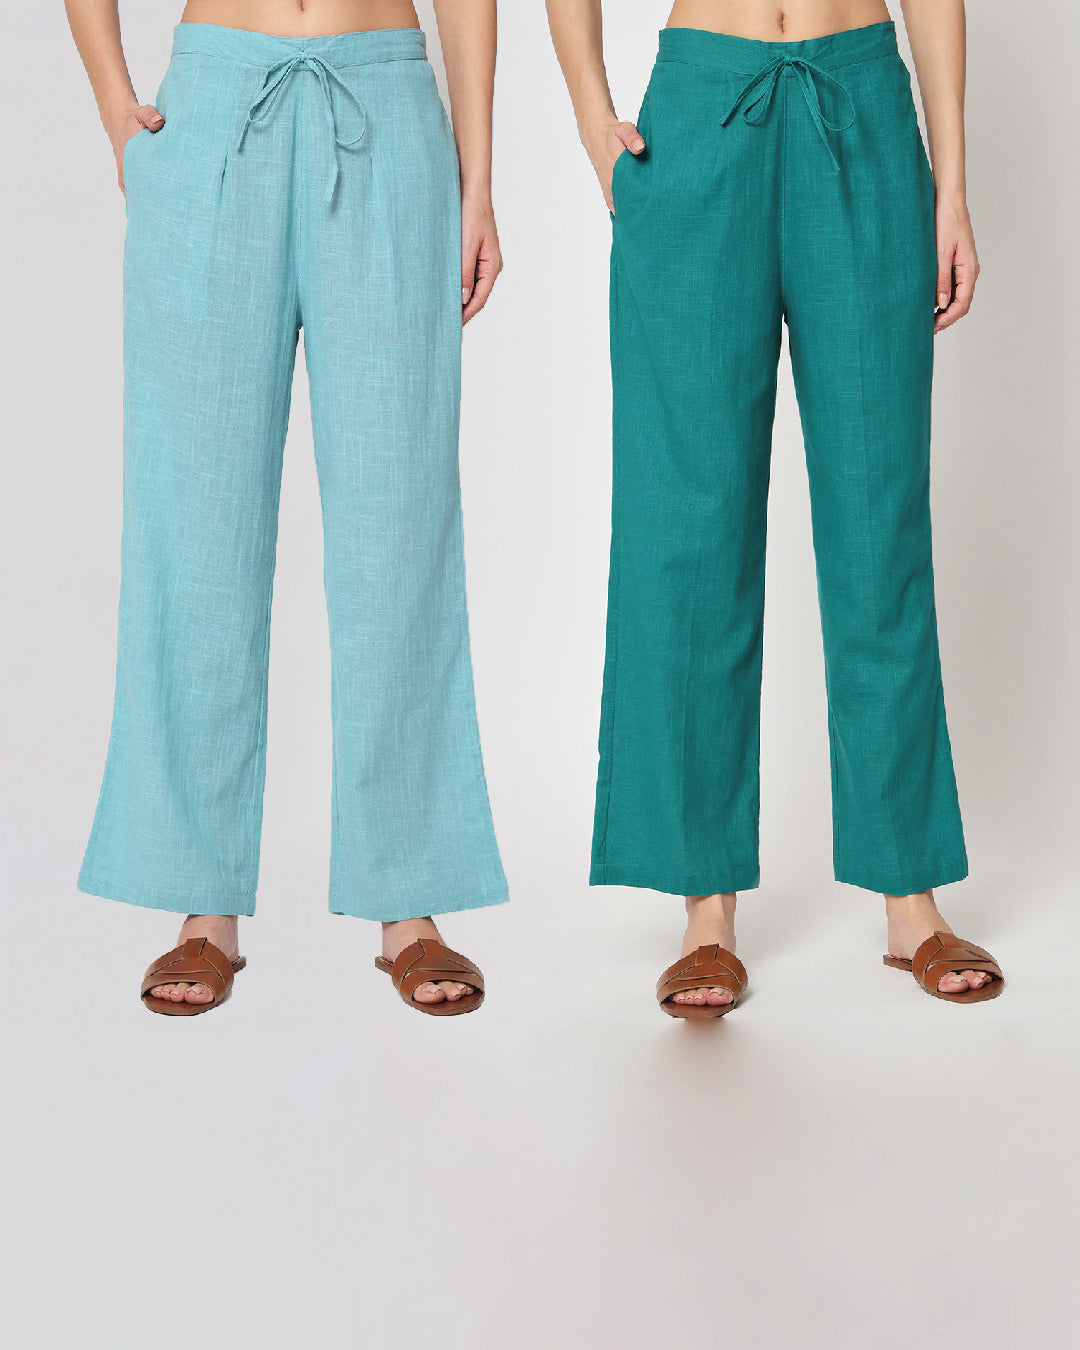 Combo: Blue Breeze & Forest Green Straight Pants- Set of 2